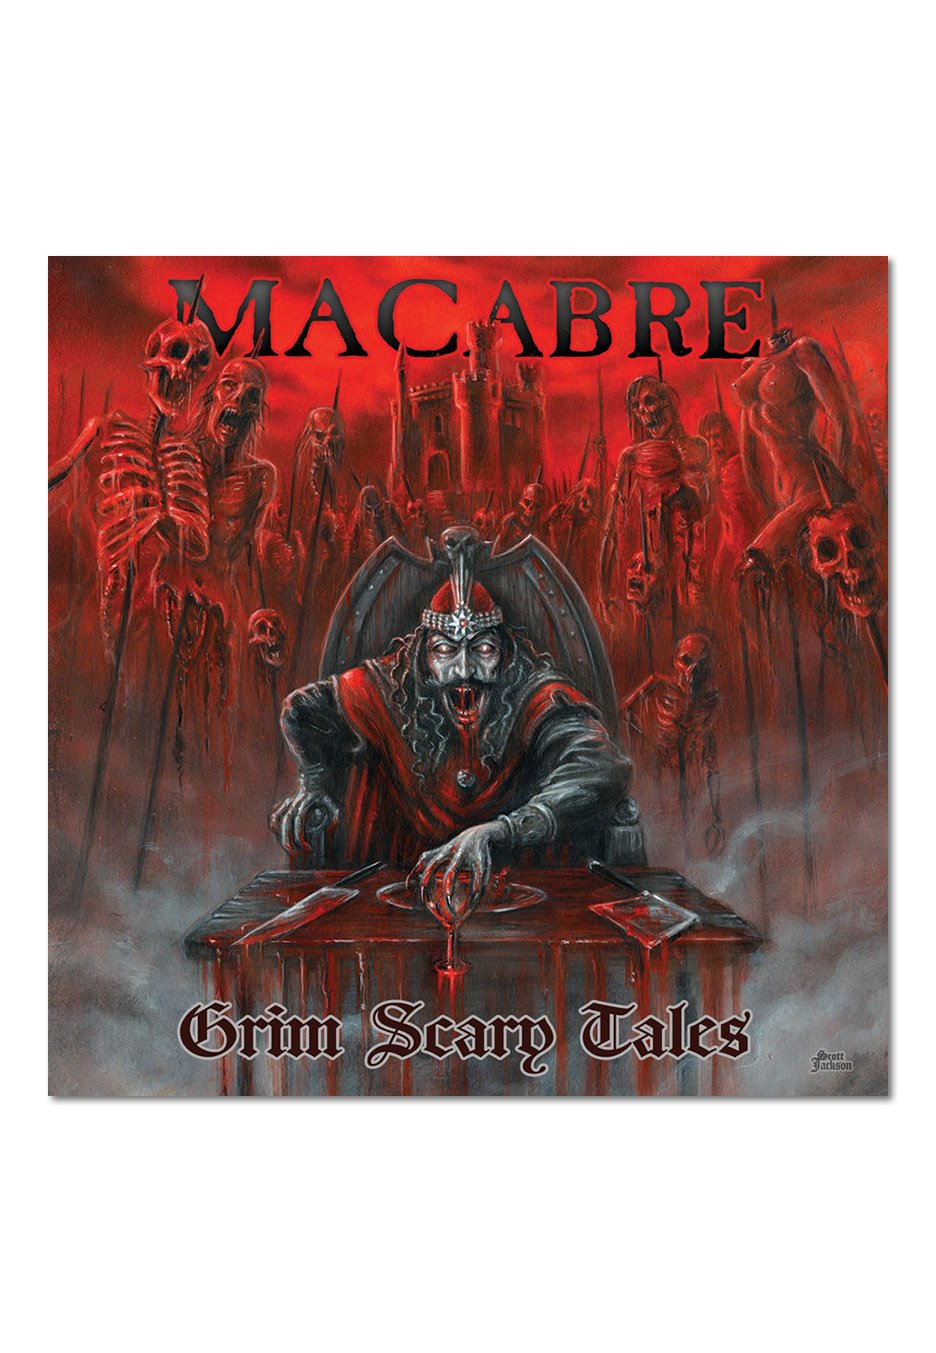 Macabre - Grim Scary Tales (Remastered) - CD